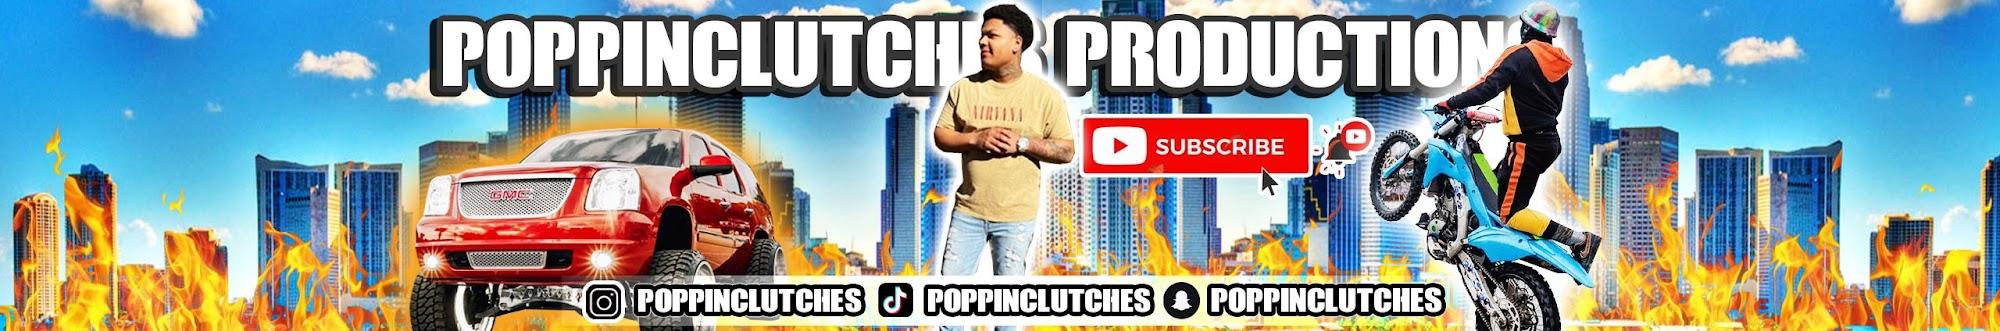 Poppin' Clutches Productions